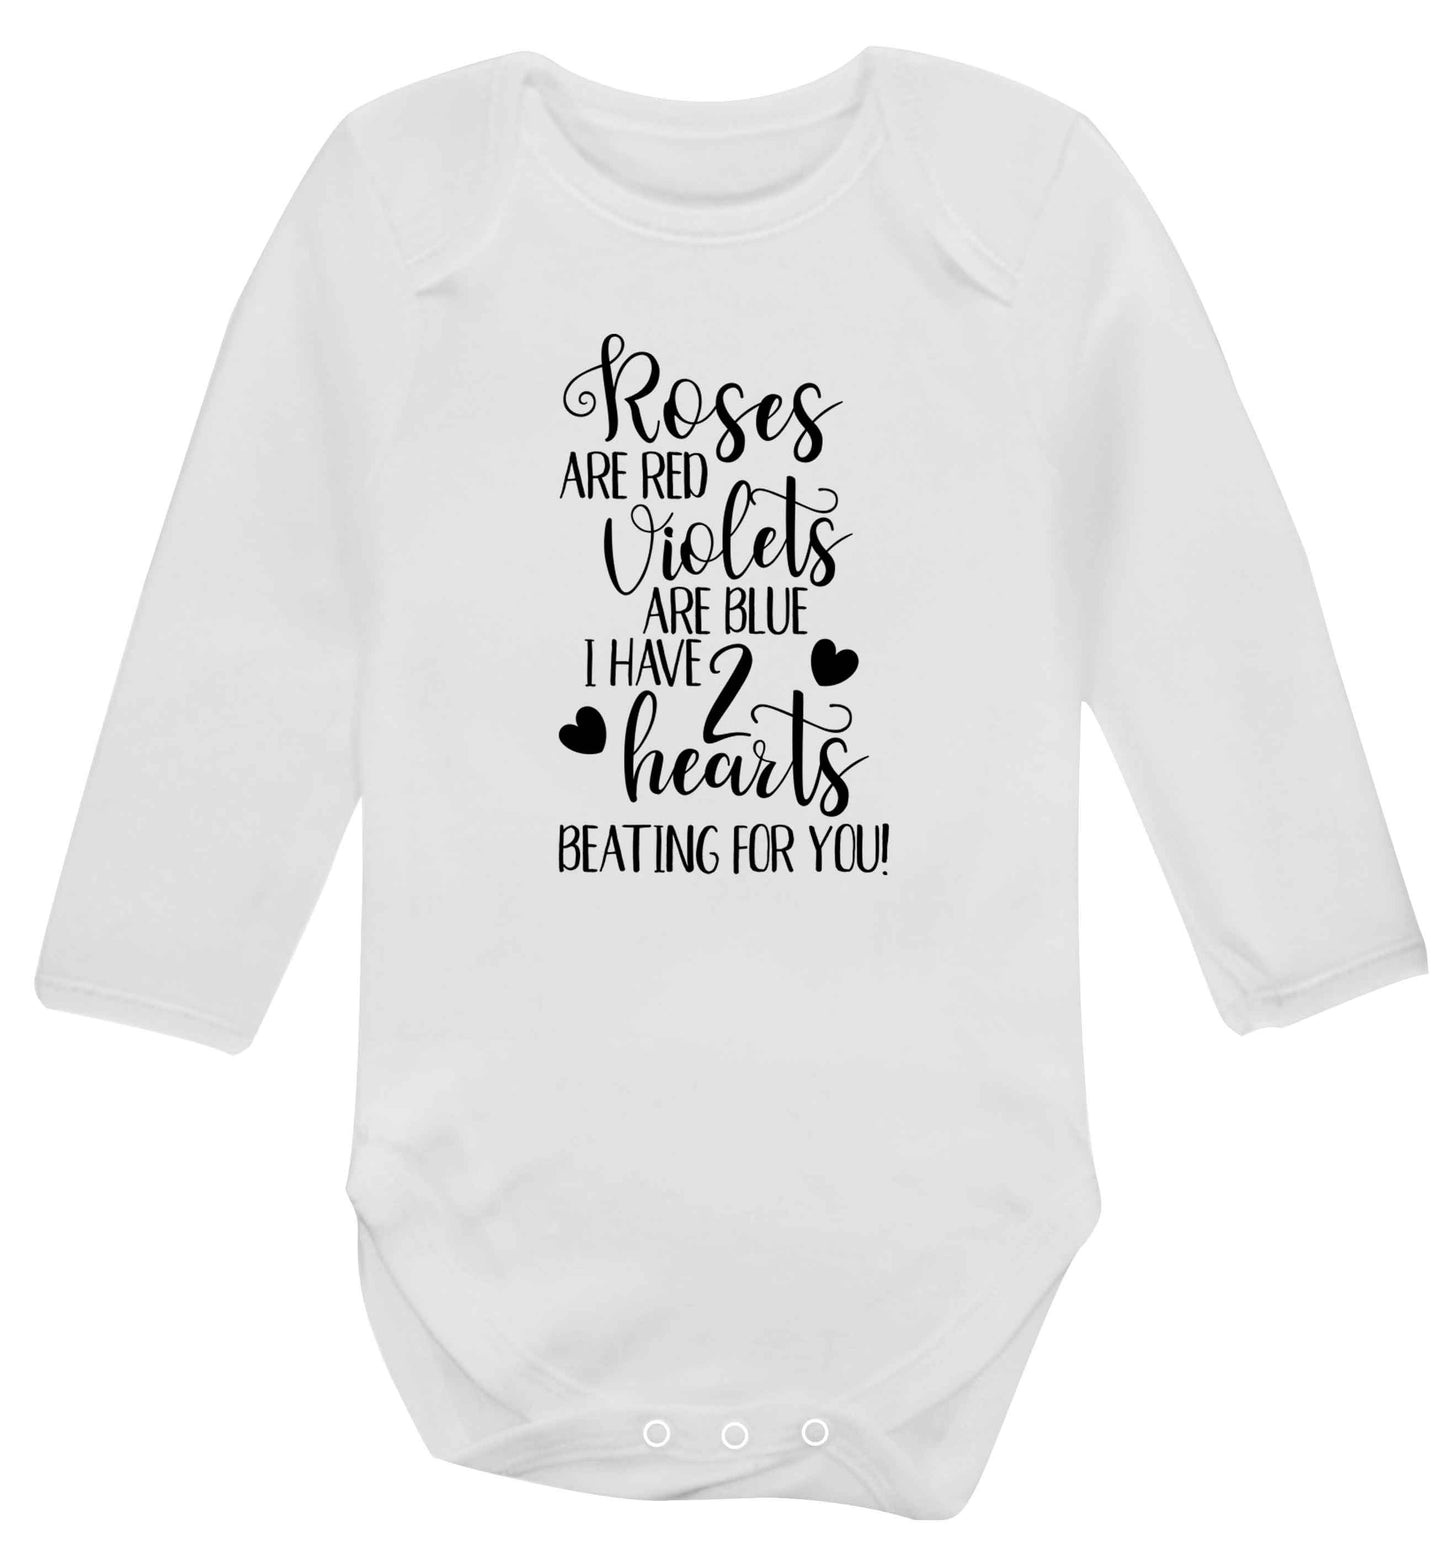 Roses are red violets are blue I have two hearts beating for you Baby Vest long sleeved white 6-12 months